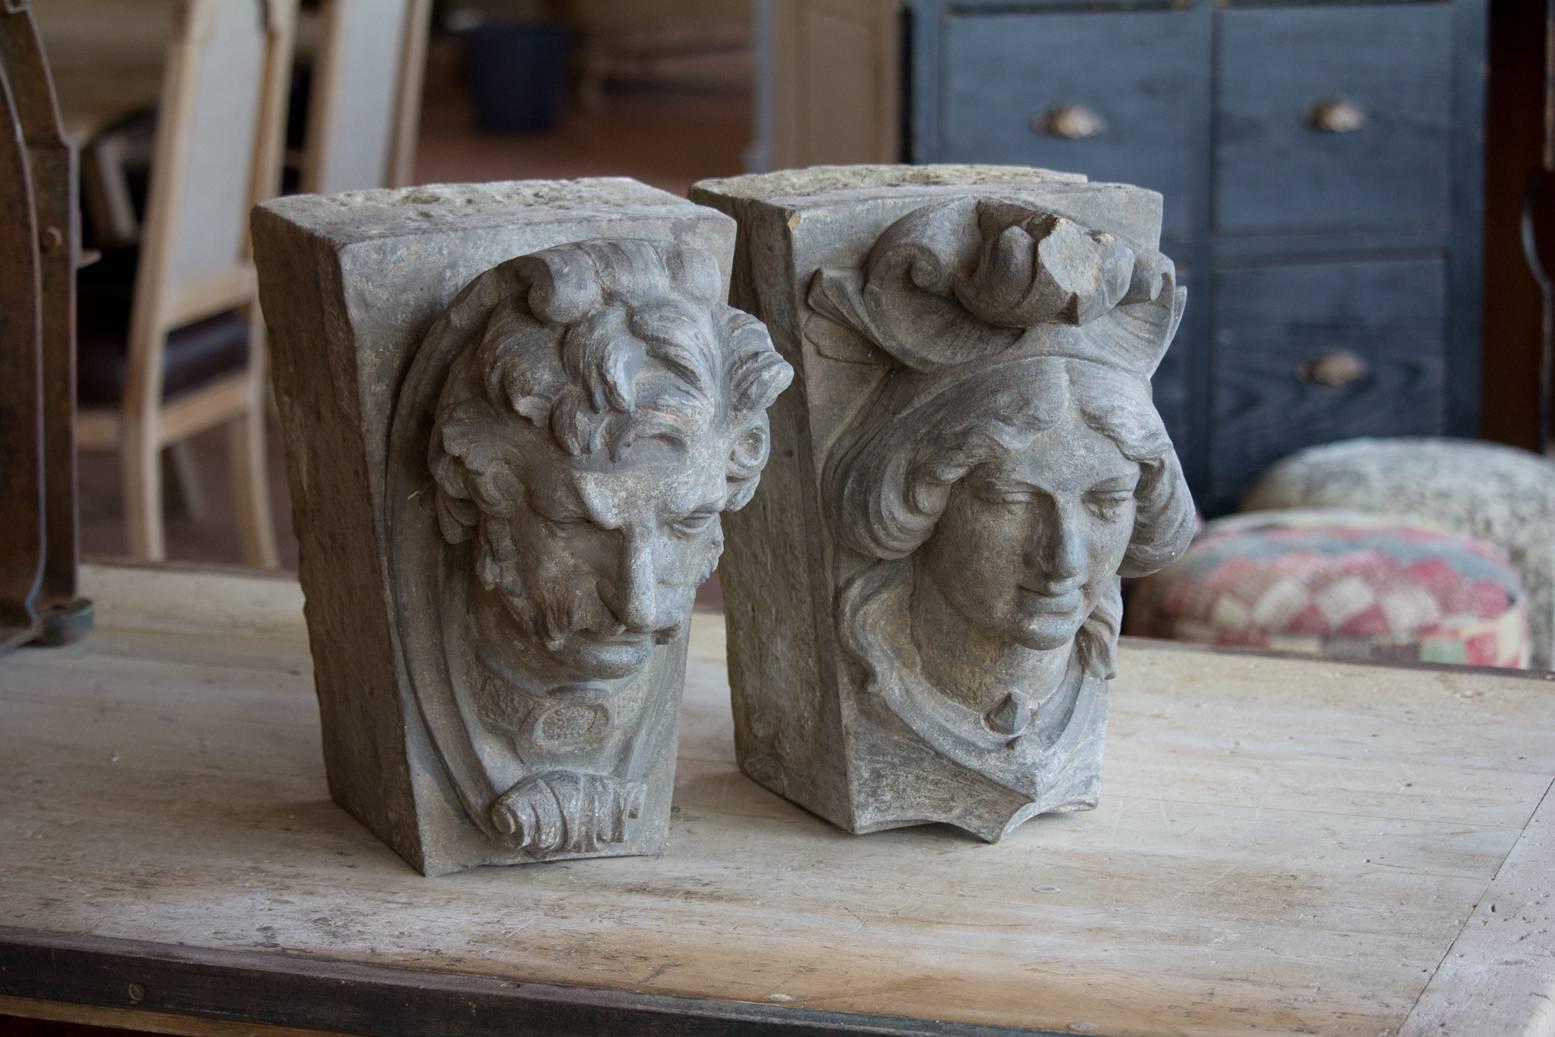 Pair of 19th century stunningly carved stone keystone heads of a male and female. Thought to have been recovered from an old English theatre.